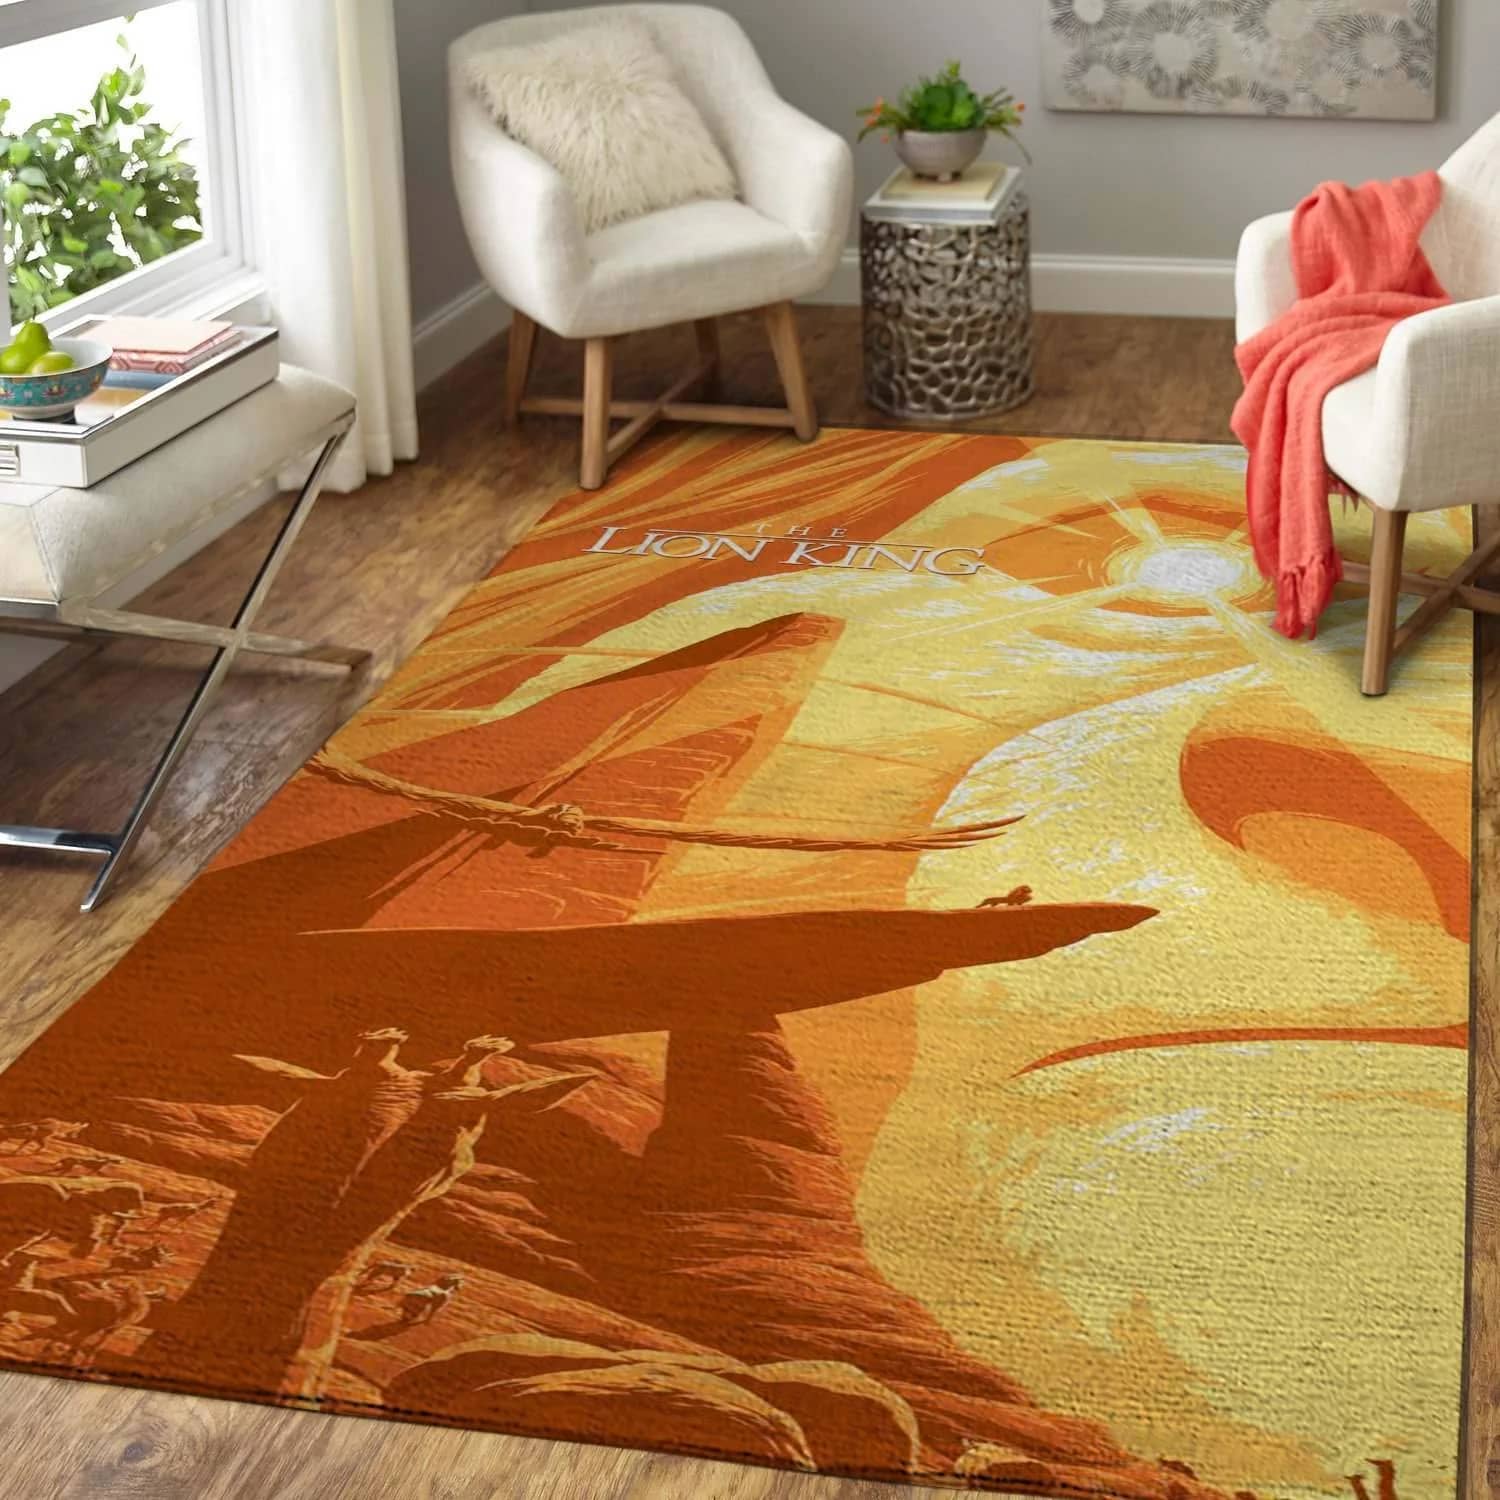 Disney Movie Fans The Lion King Area Limited Edition Amazon Best Seller Sku 267199 Rug